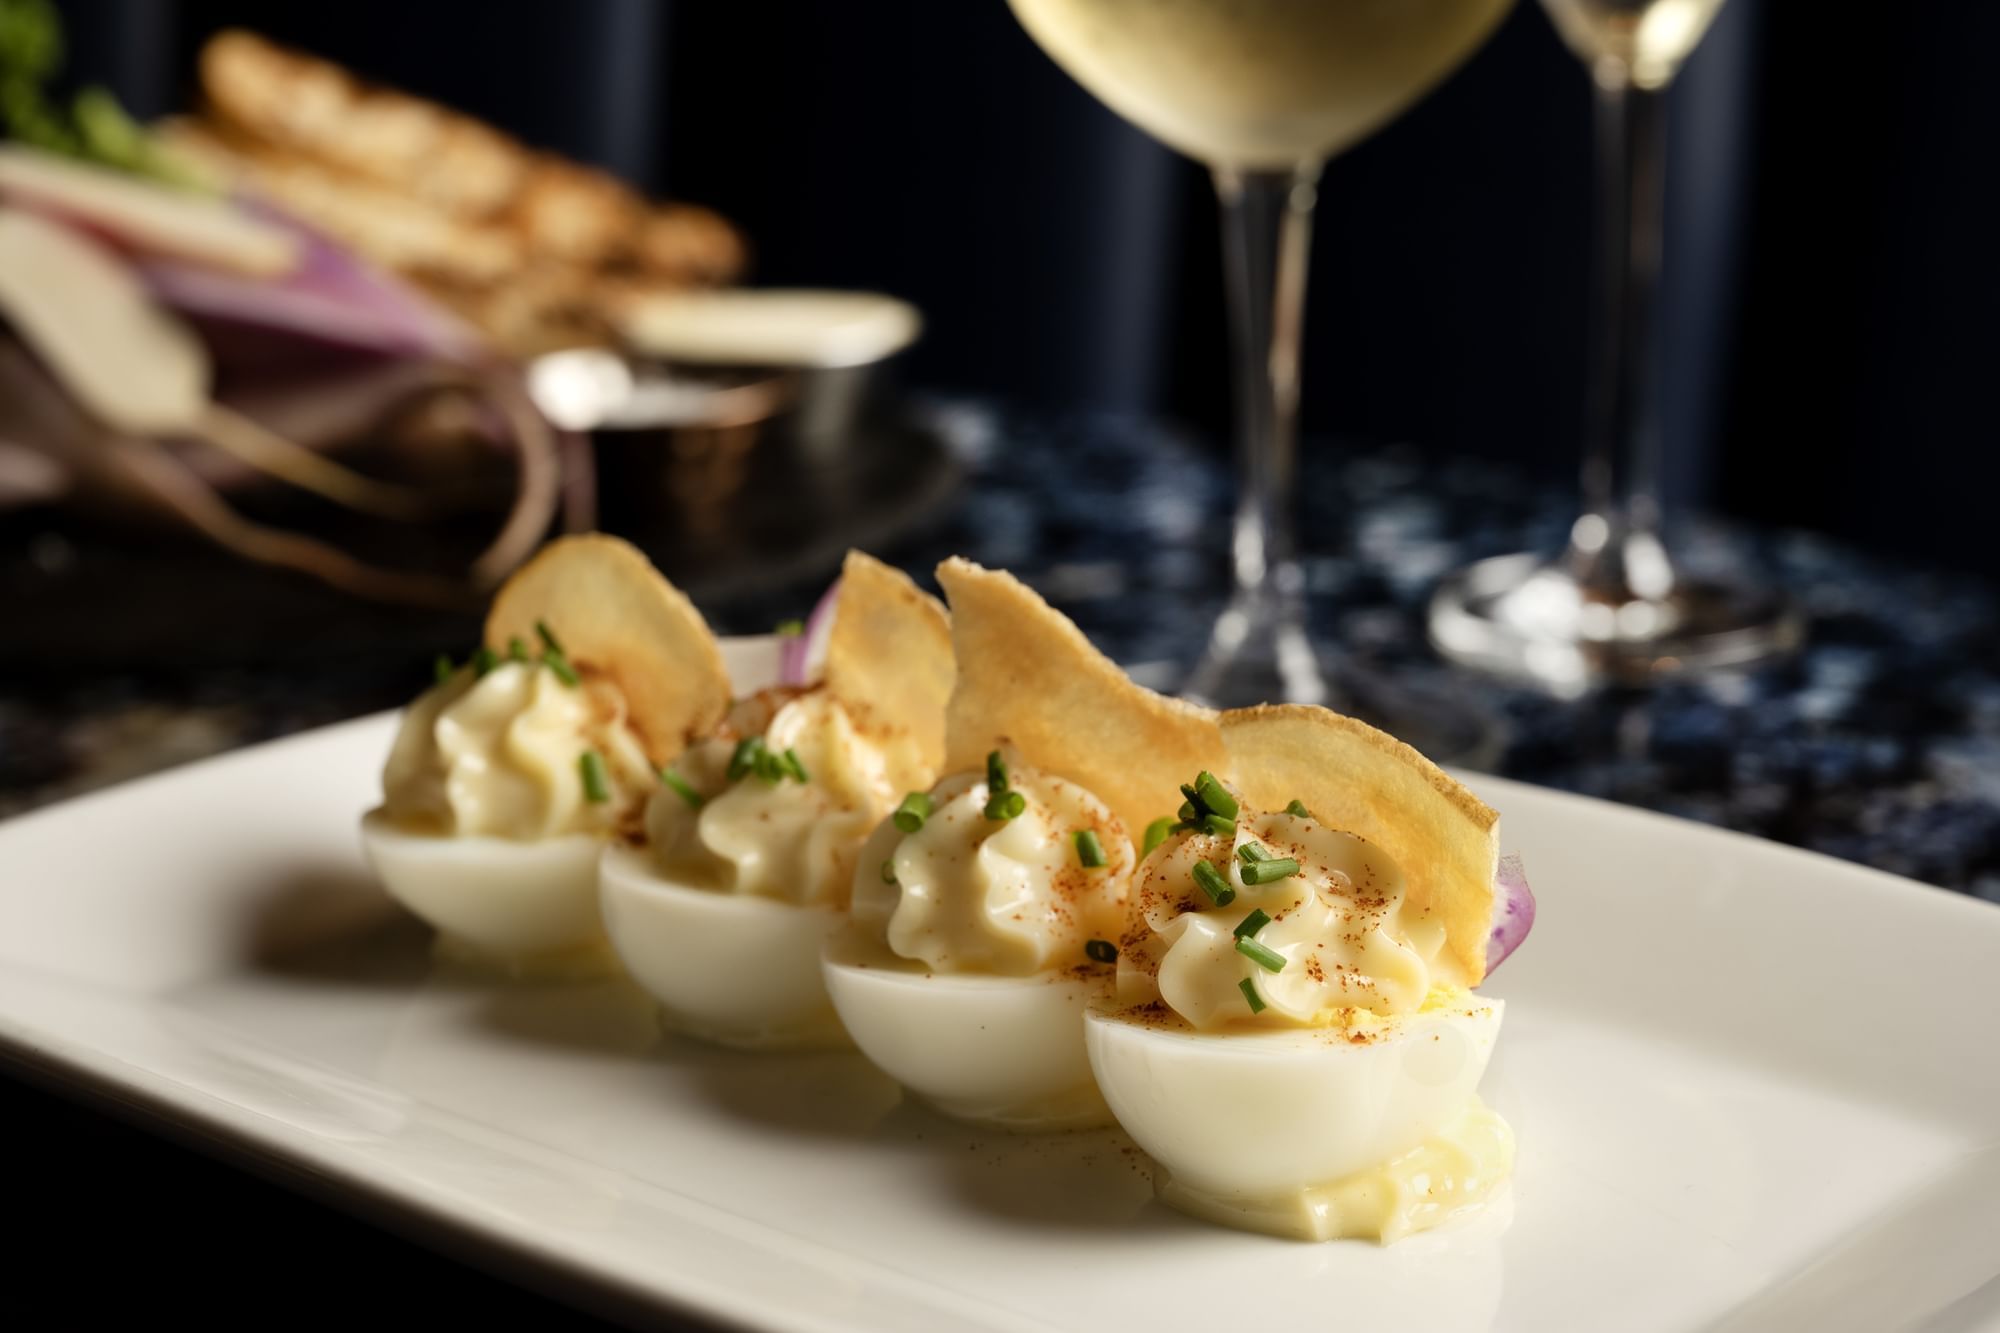 A plate of 4 Deviled Eggs with free-range egg, mustard, mayonnaise, radish, espelette pepper, chive